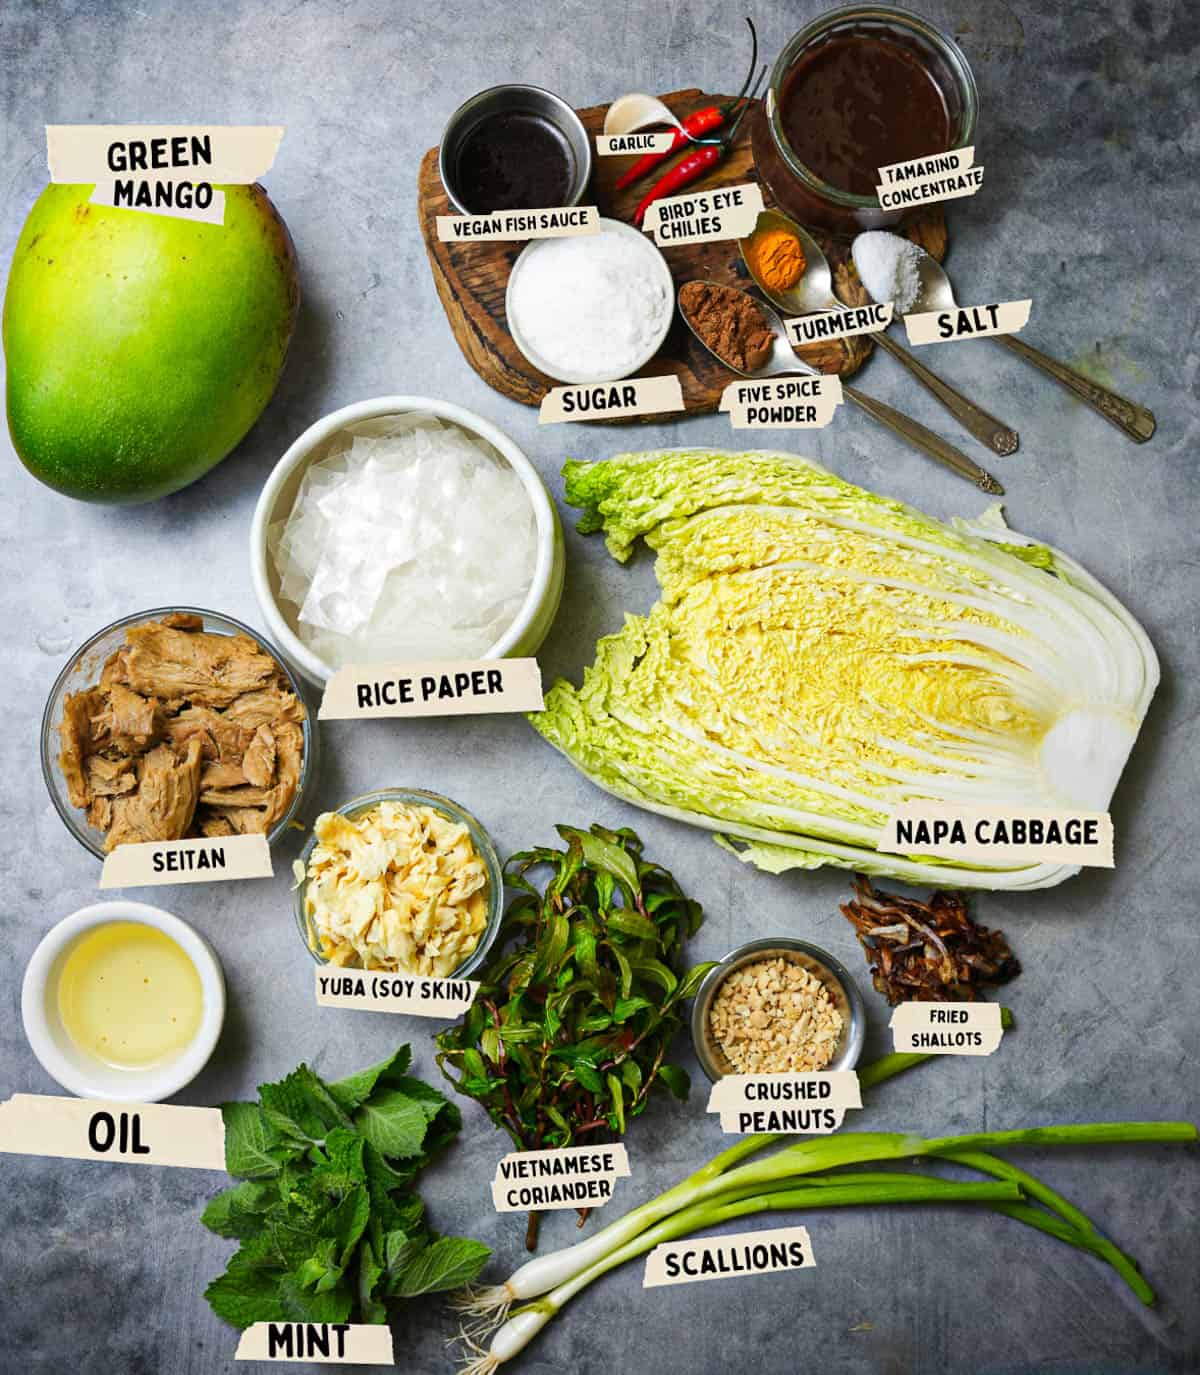 Ingredients for a Vietnamese rice paper salad measured and labeled on a counter top.